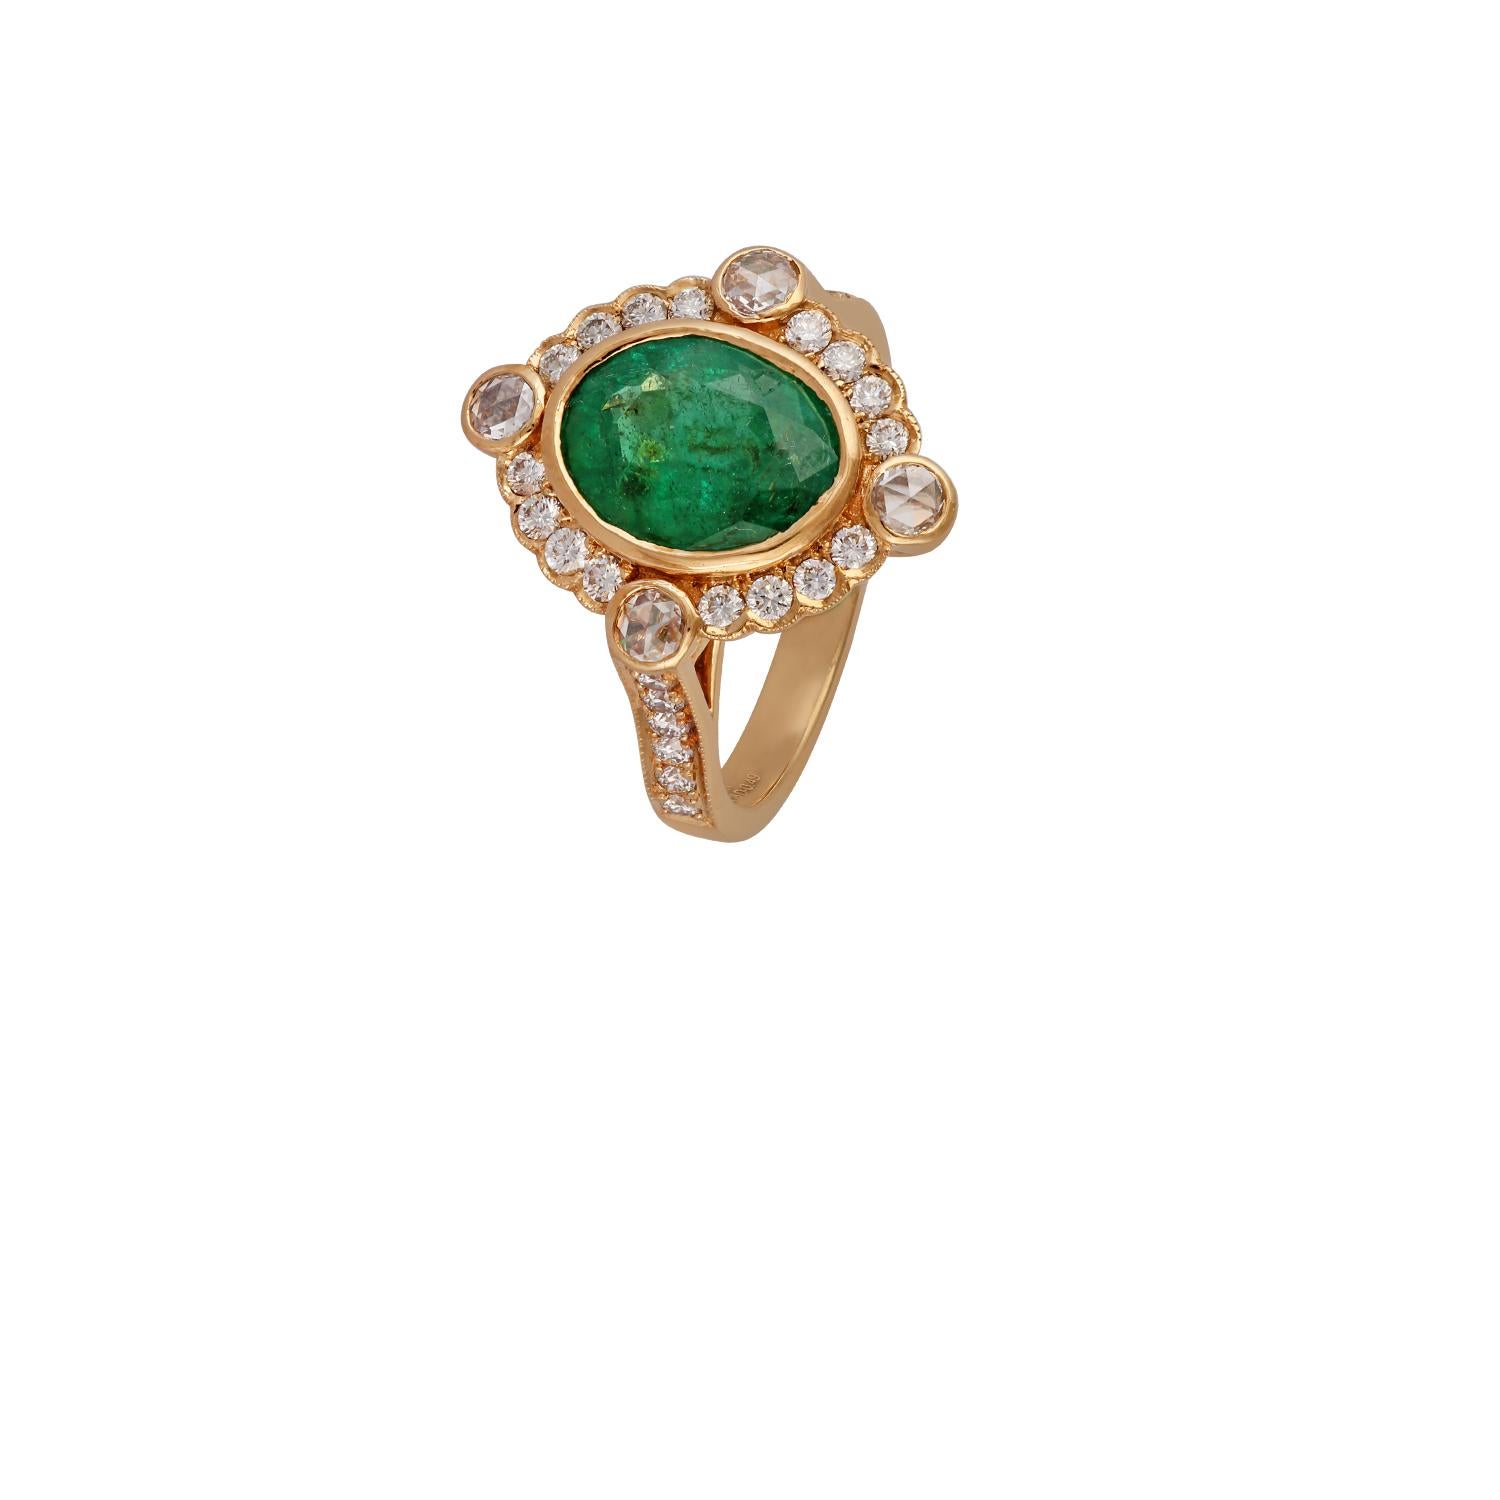 2.47 Carat Carved Zambian Emerald & Cluster Diamond Ring in 18k Gold In New Condition For Sale In Jaipur, Rajasthan